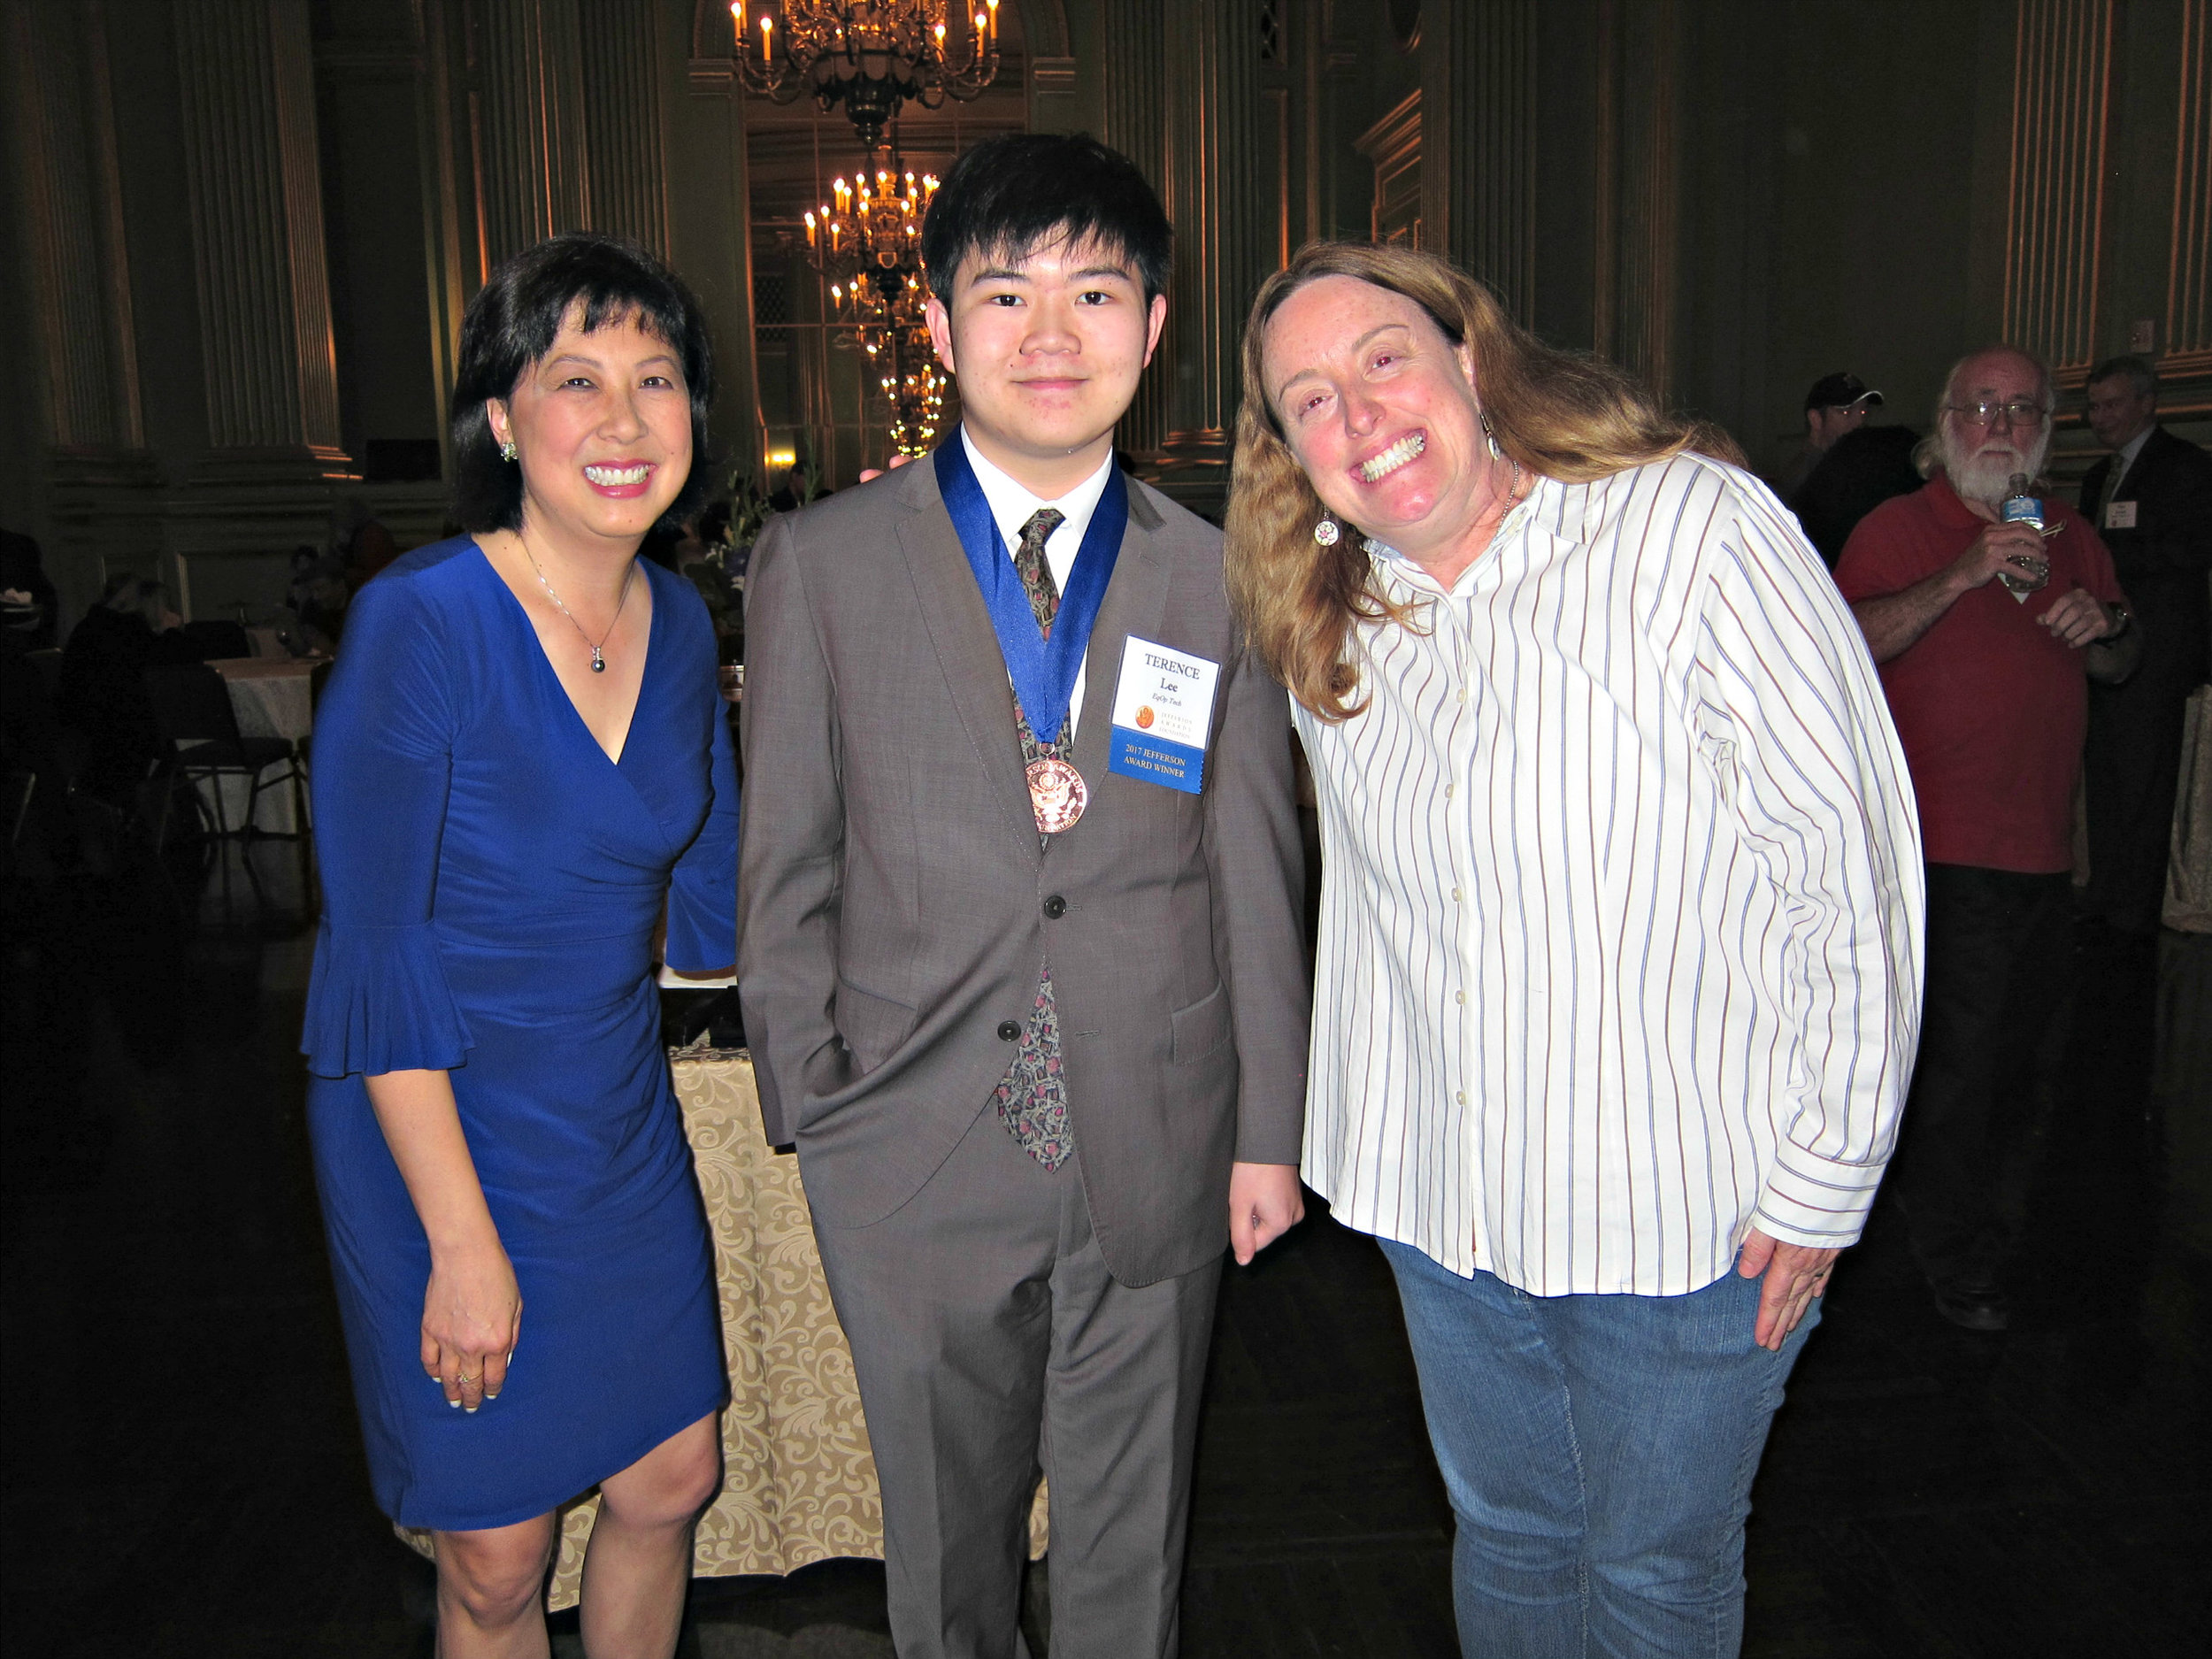 Terence Lee, center, wearing his Jefferson Award Medal, is flanked by CBS KPIX, Sharon Chin, left, and Jennifer Mistrot